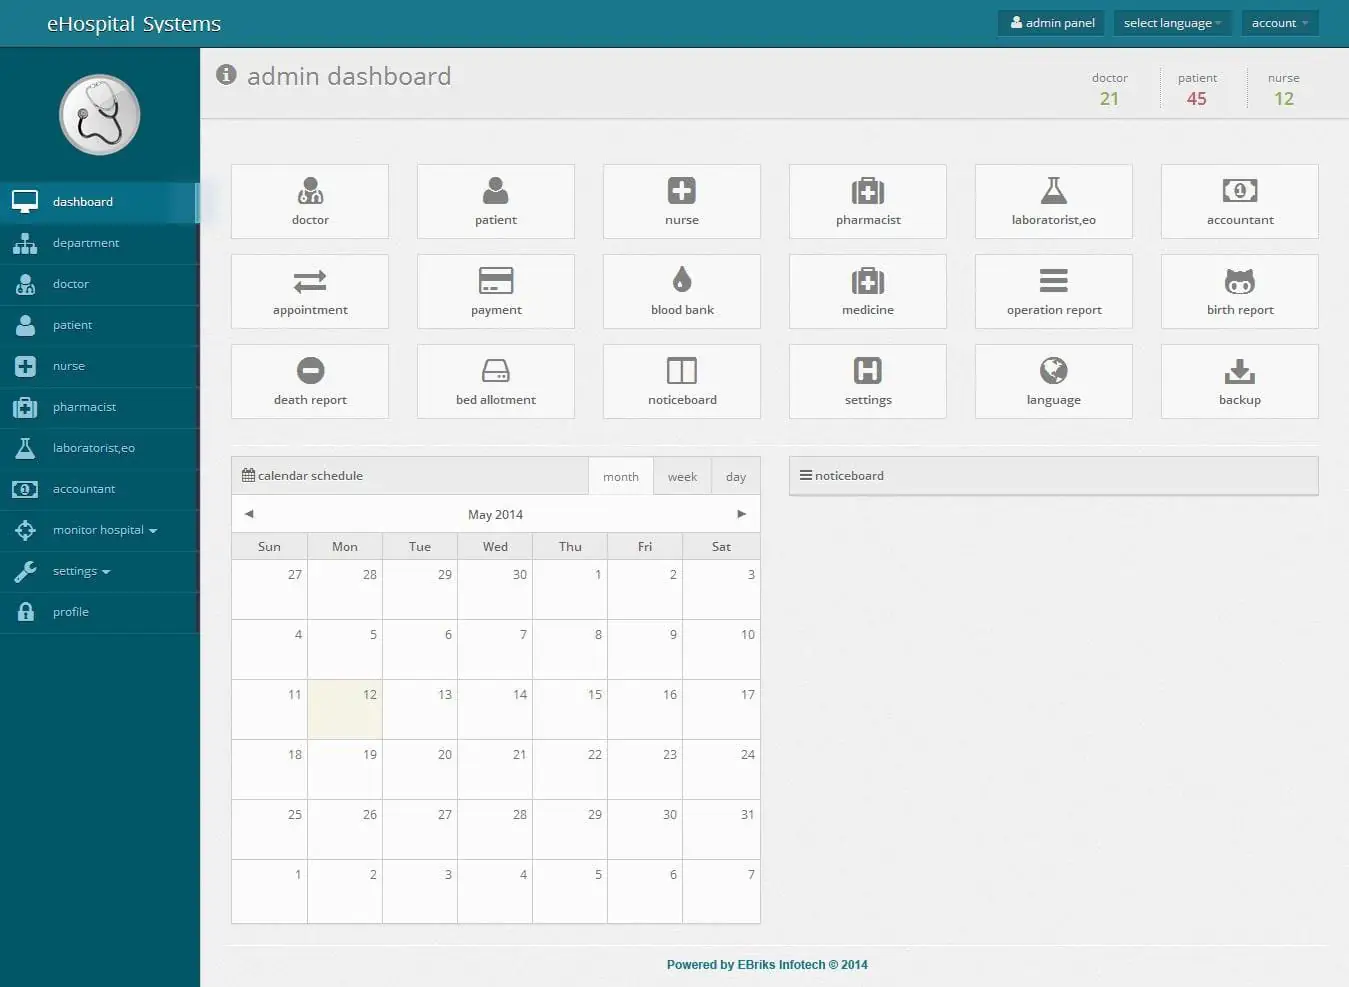 Interface of the eHospital clinic management system